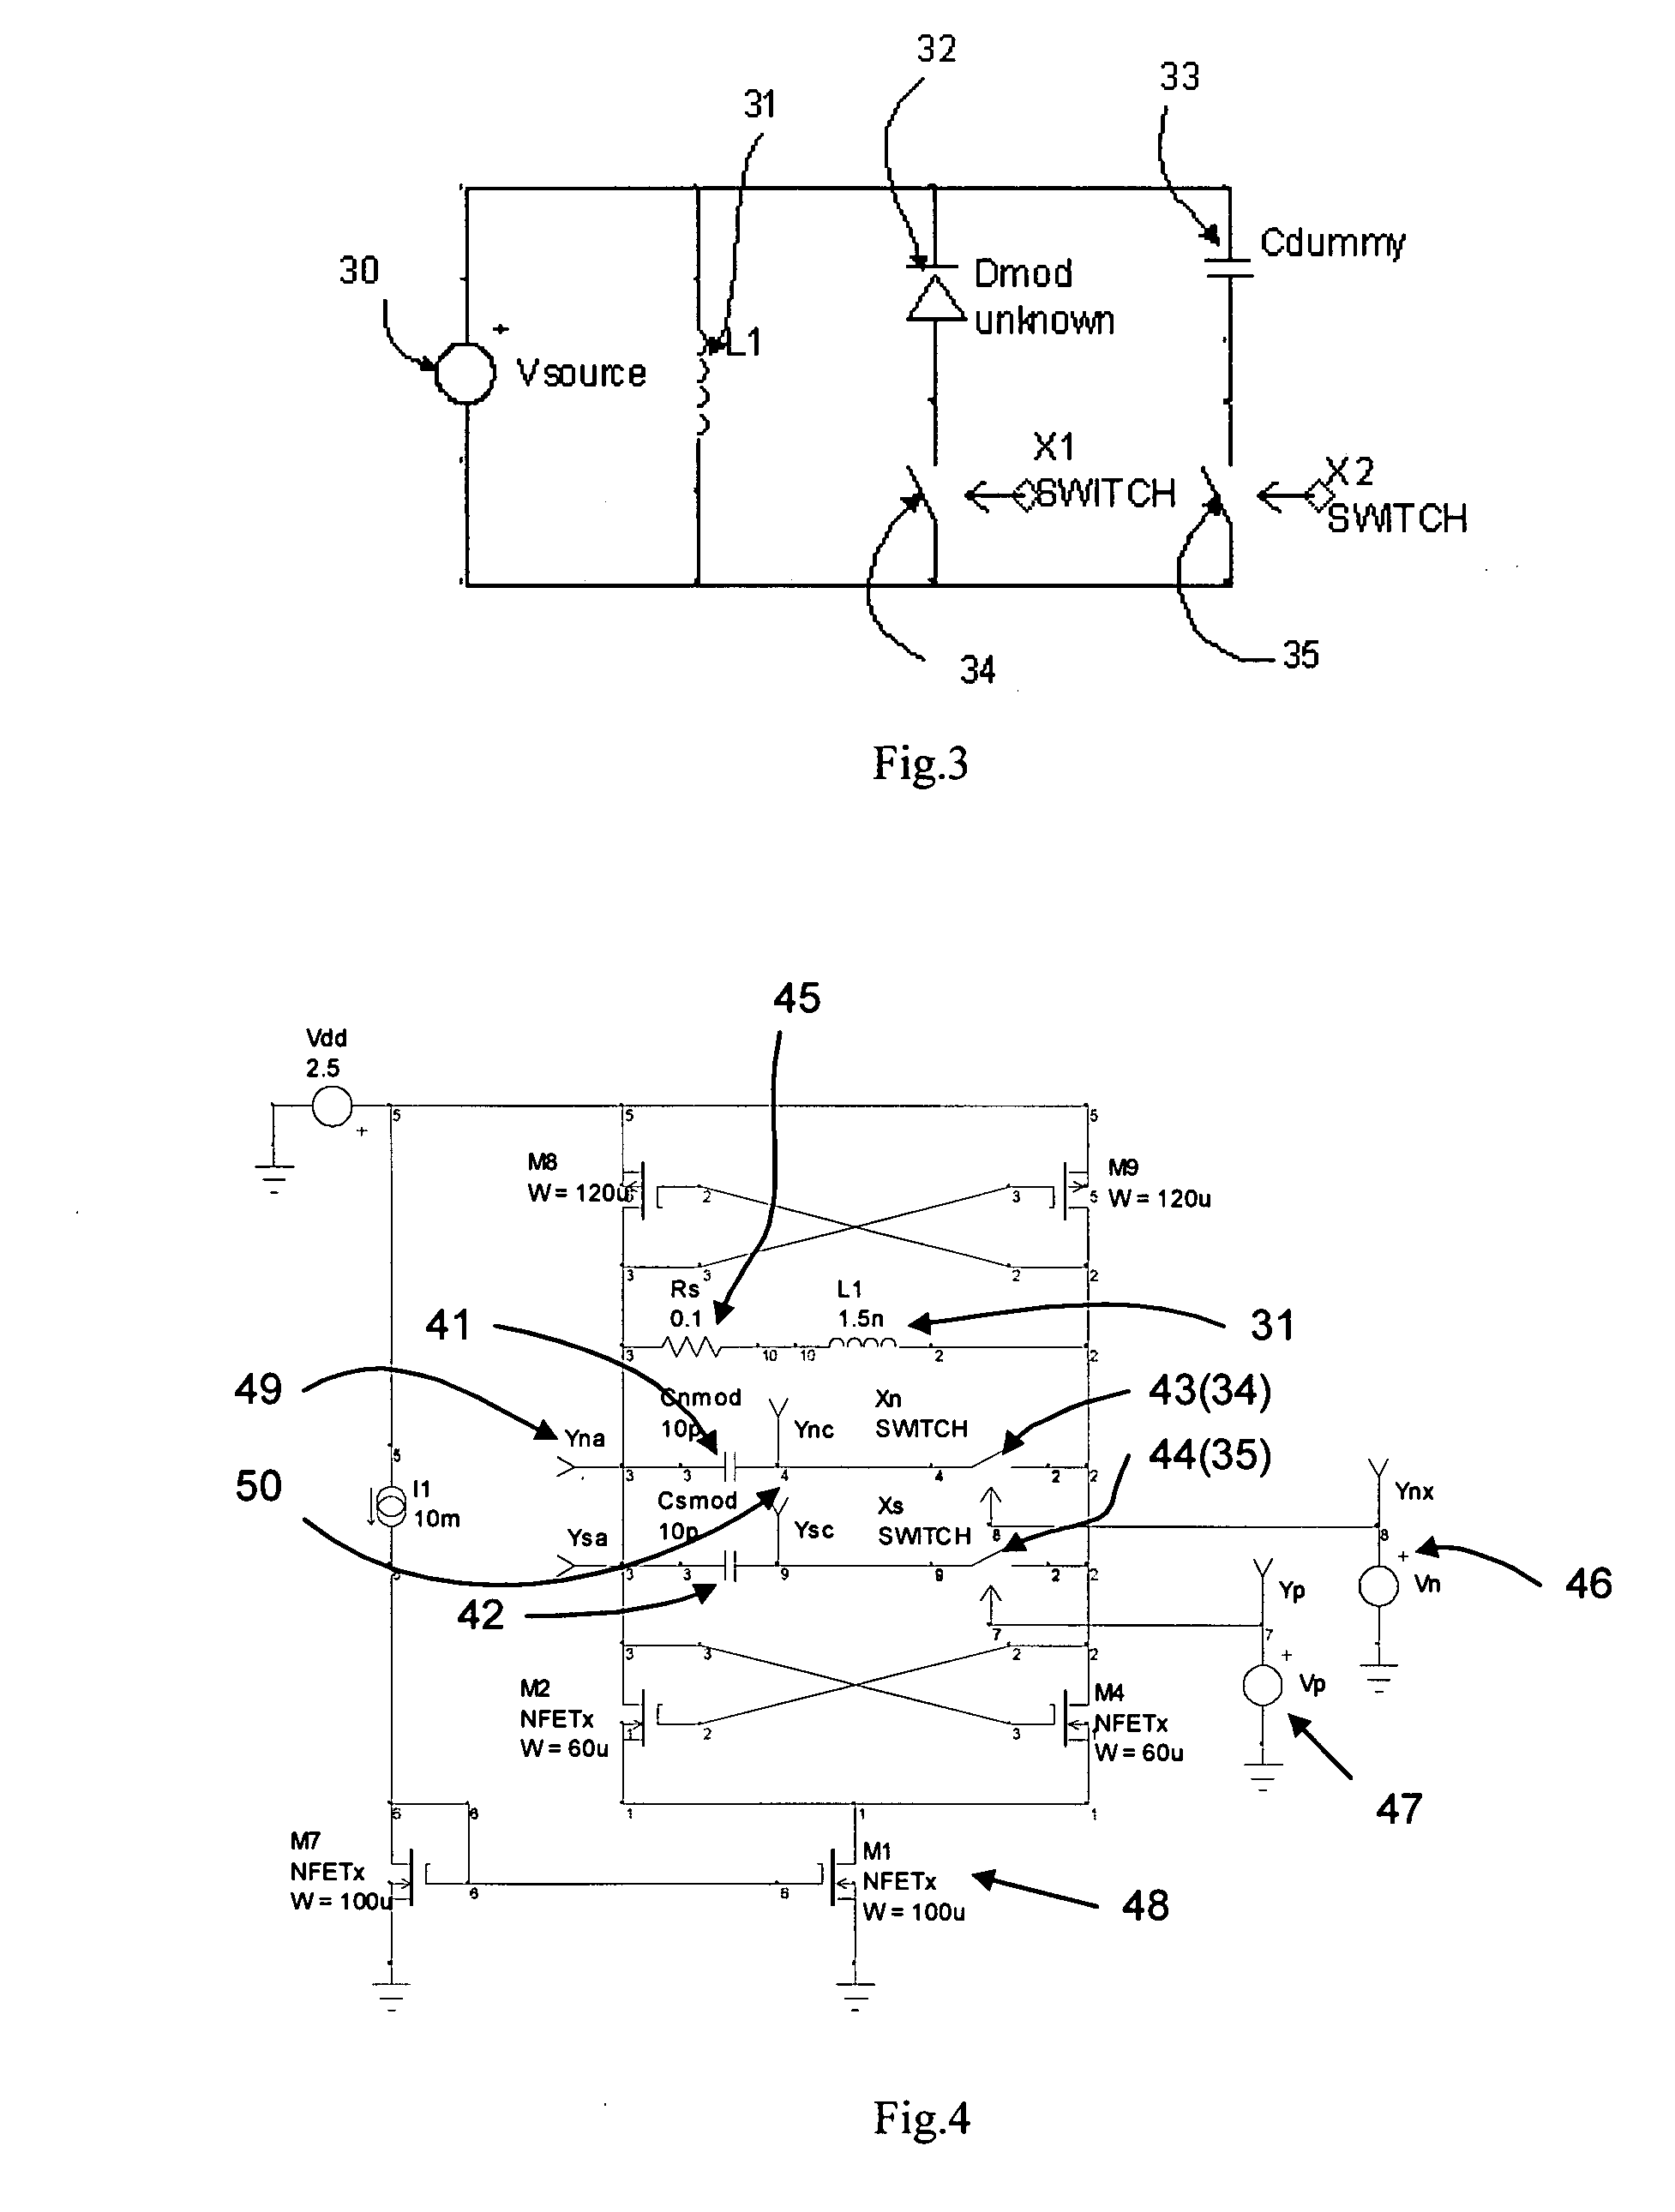 Circuit architecture for electro-optic modulation based on free carrier dispersion effect and the waveguide capacitor structures for such modulator circuitry using CMOS or Bi-CMOS process